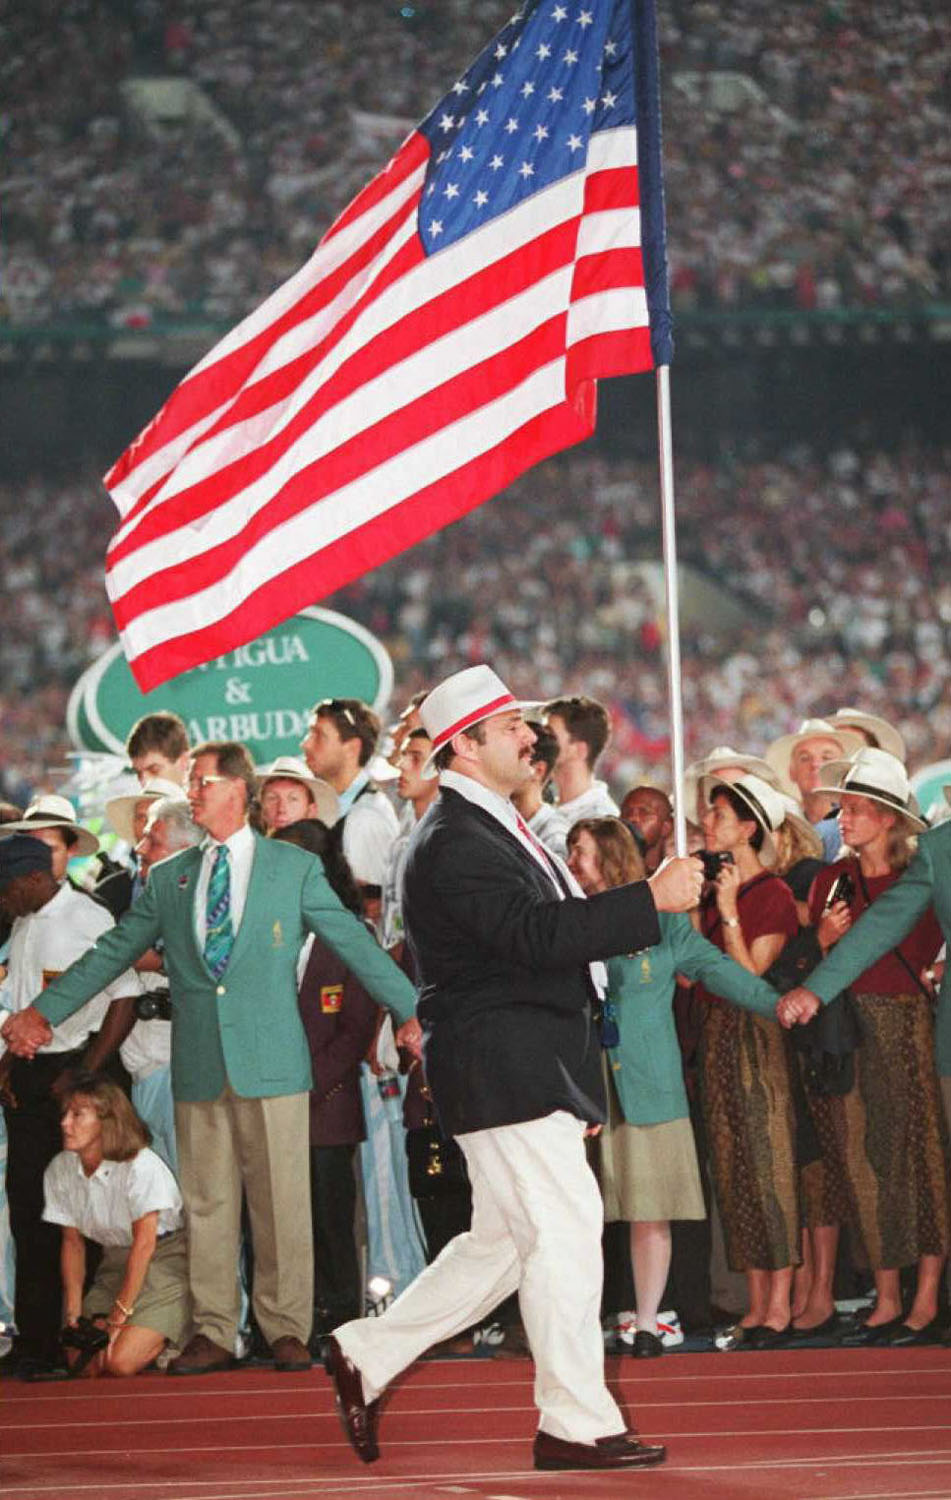 US Olympic wrestler Bruce Baumgartner carries the American flag during the opening ceremony at the Olympic Stadium in Atlanta in 1996.